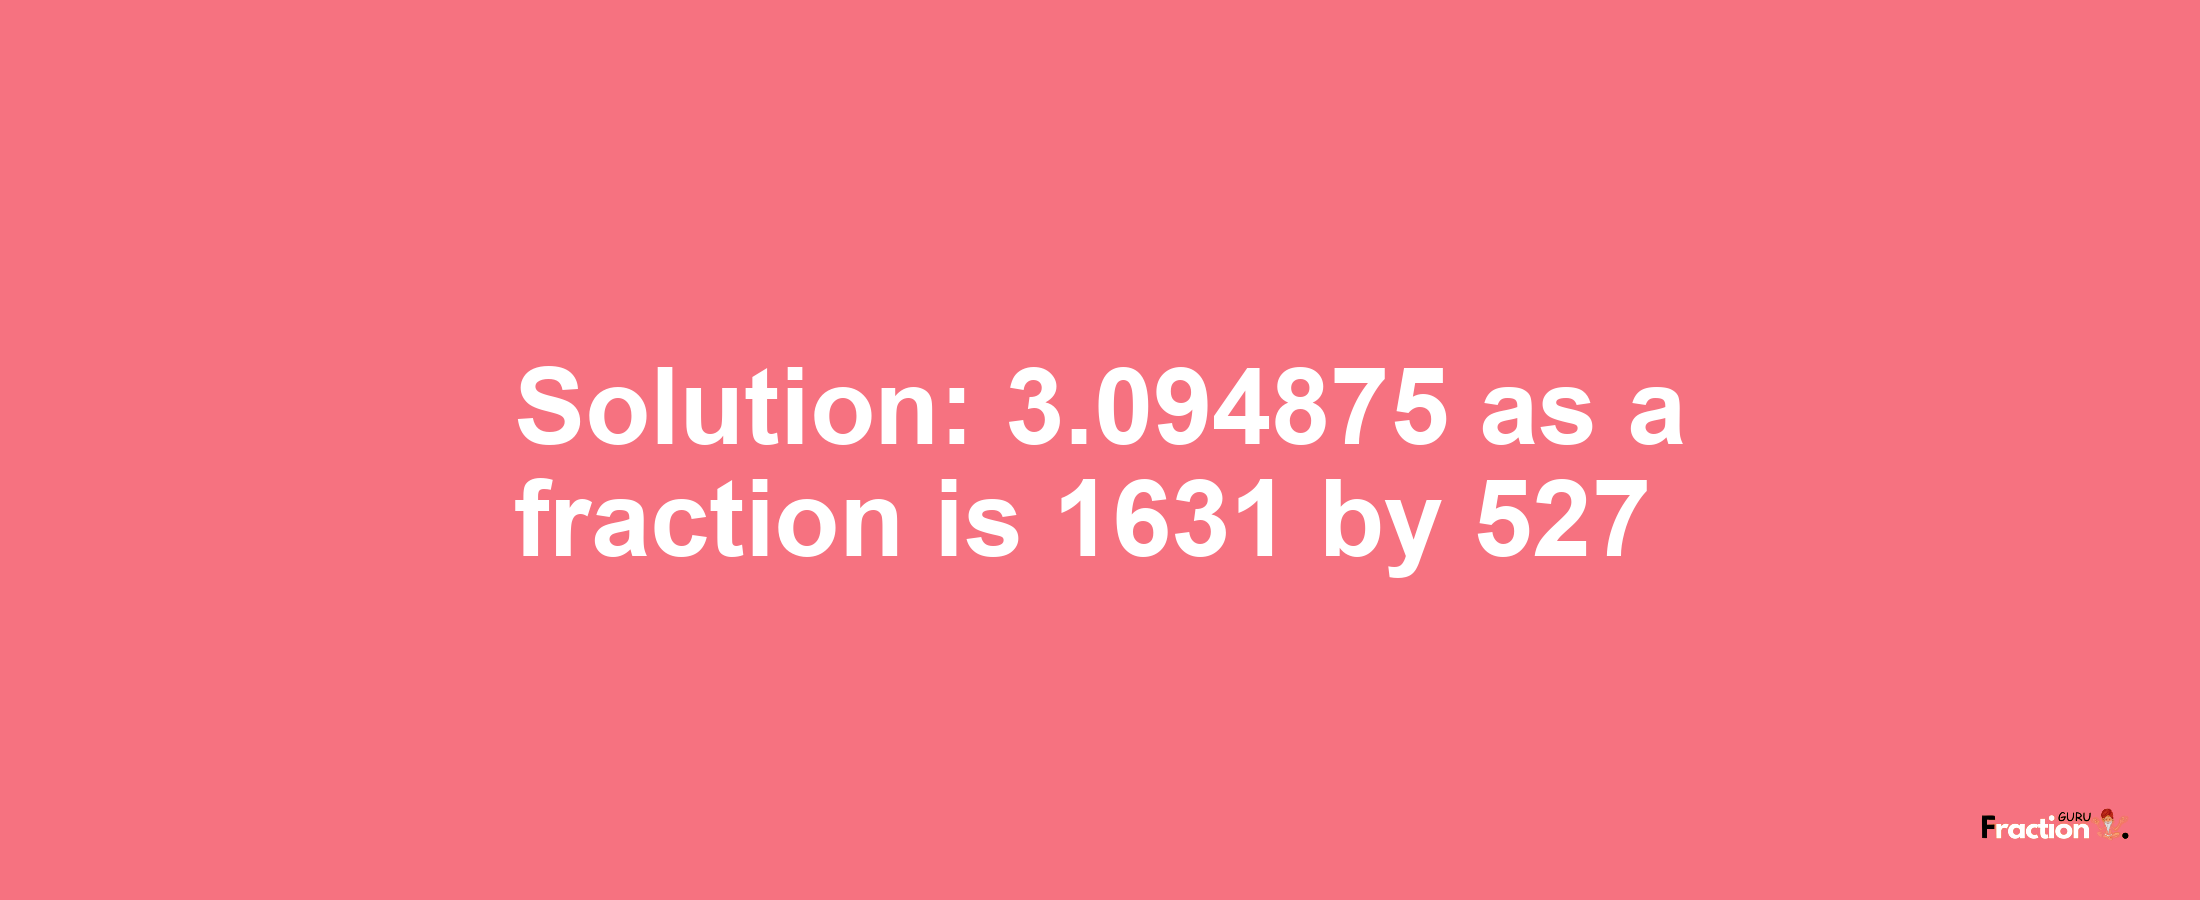 Solution:3.094875 as a fraction is 1631/527